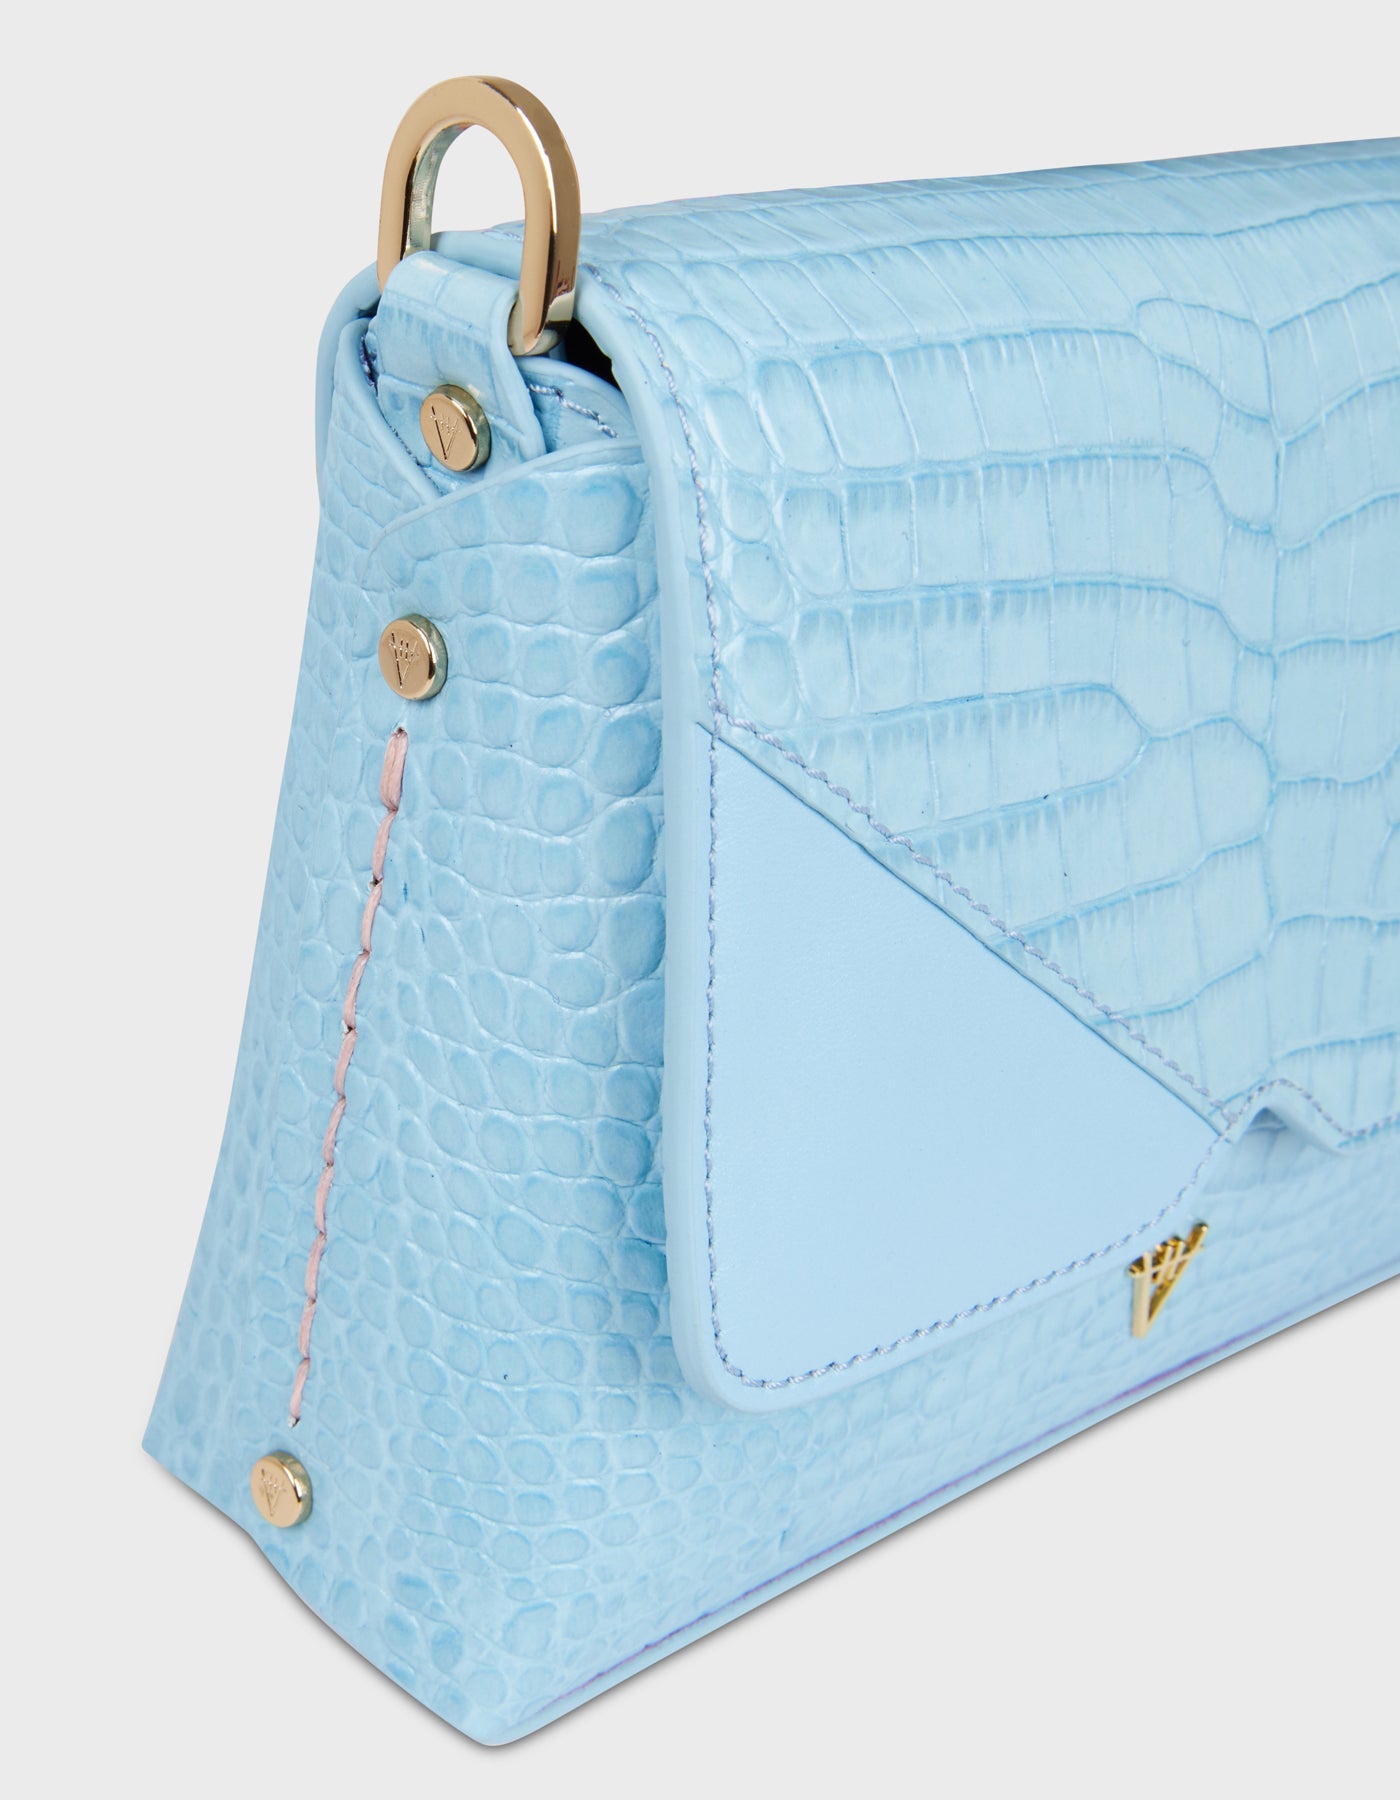 HiVa Atelier | Mini Mare Shoulder Bag Croco Effect Tranquil Blue | Beautiful and Versatile Leather Accessories